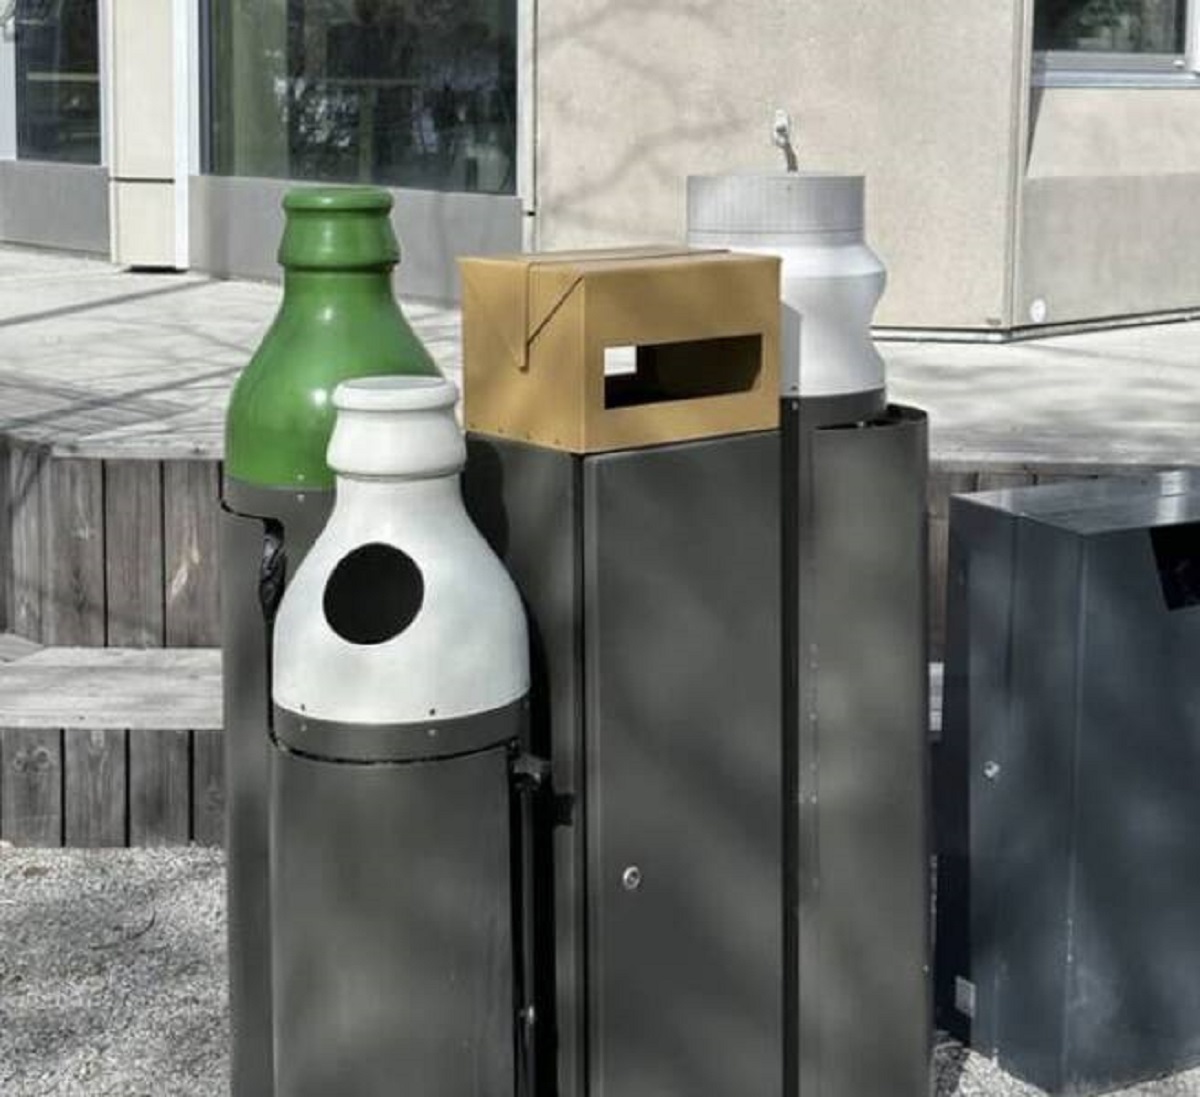 The tops on recycling bins in Sweden show you exactly what you're supposed to put in them.